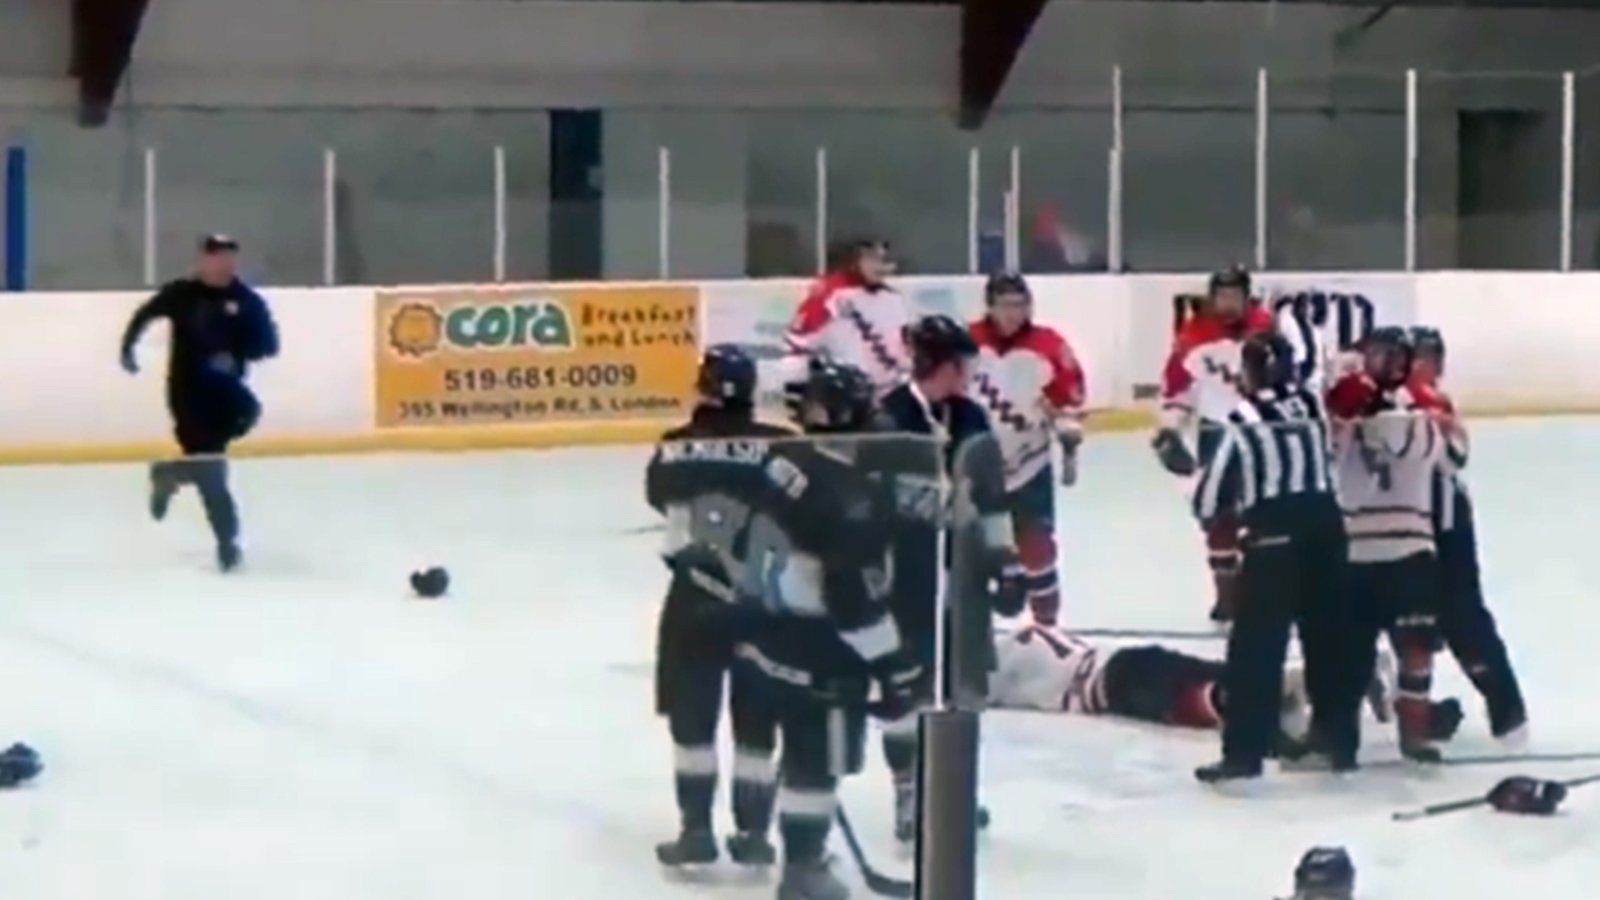 Referee knocks out player then gets absolutely destroyed by the team’s trainer